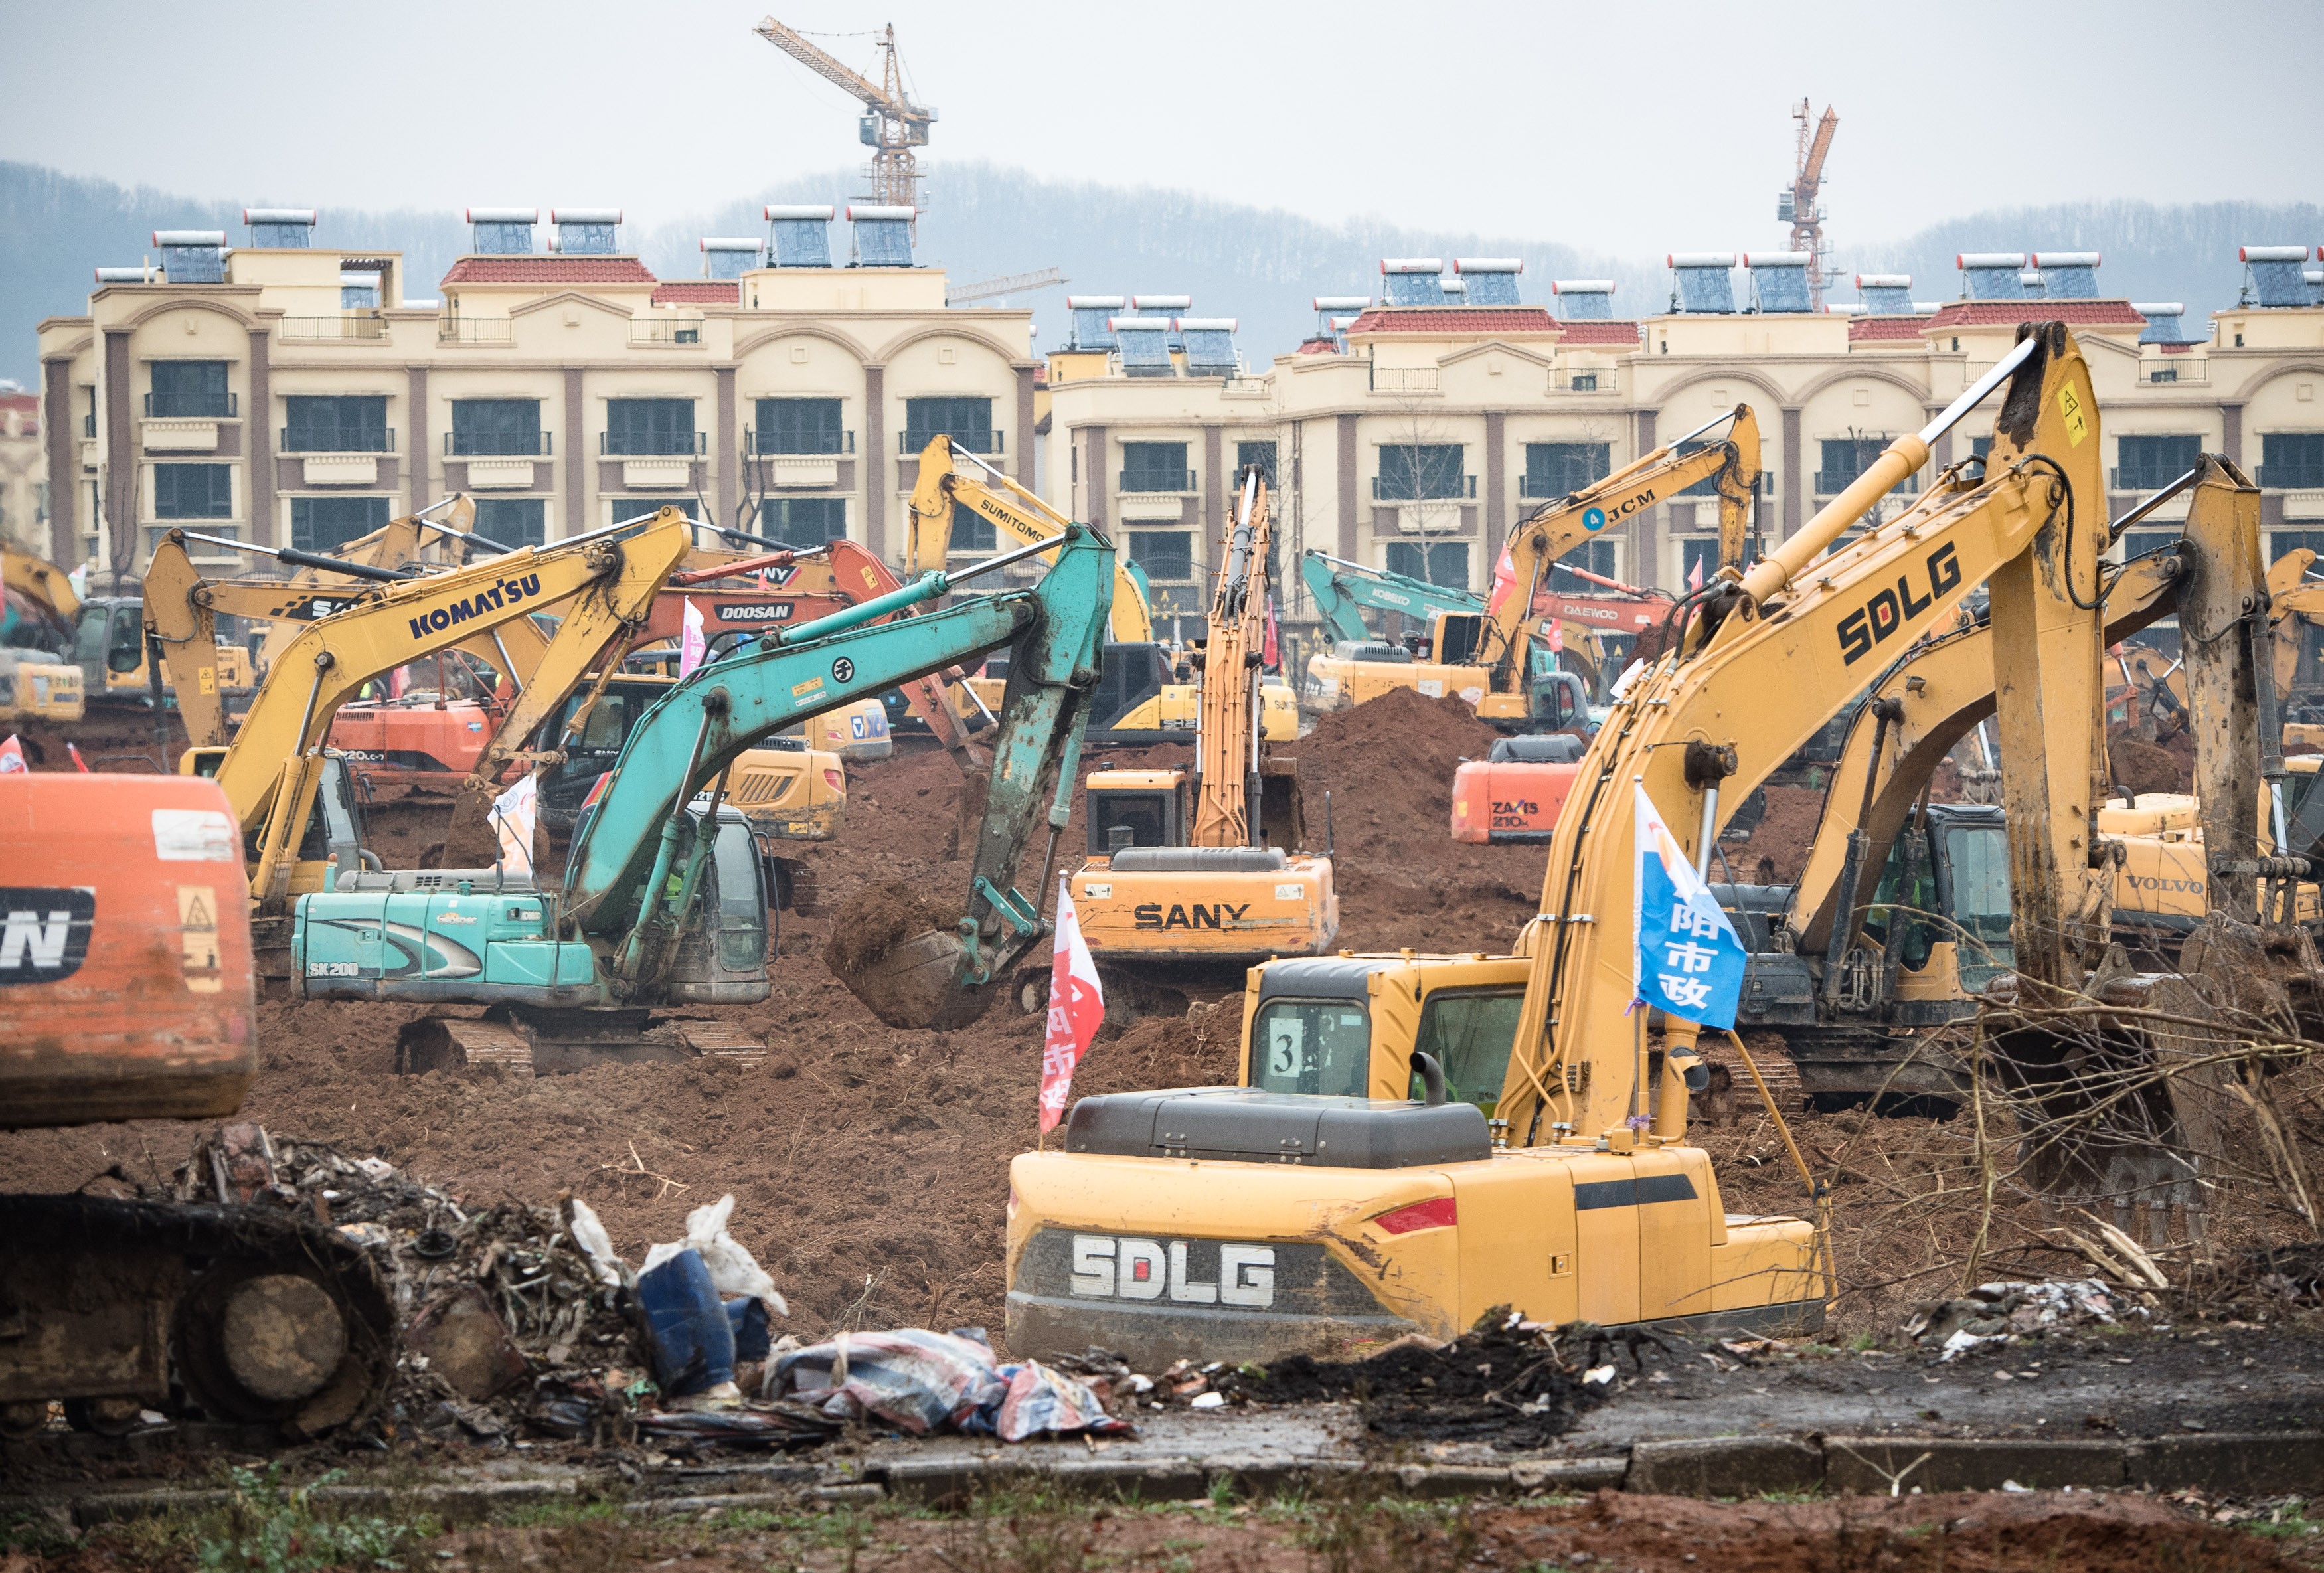 Dozens of excavators break ground for the new coronavirus facility in Wuhan, expected to be completed within six days. Photo: Xinhua